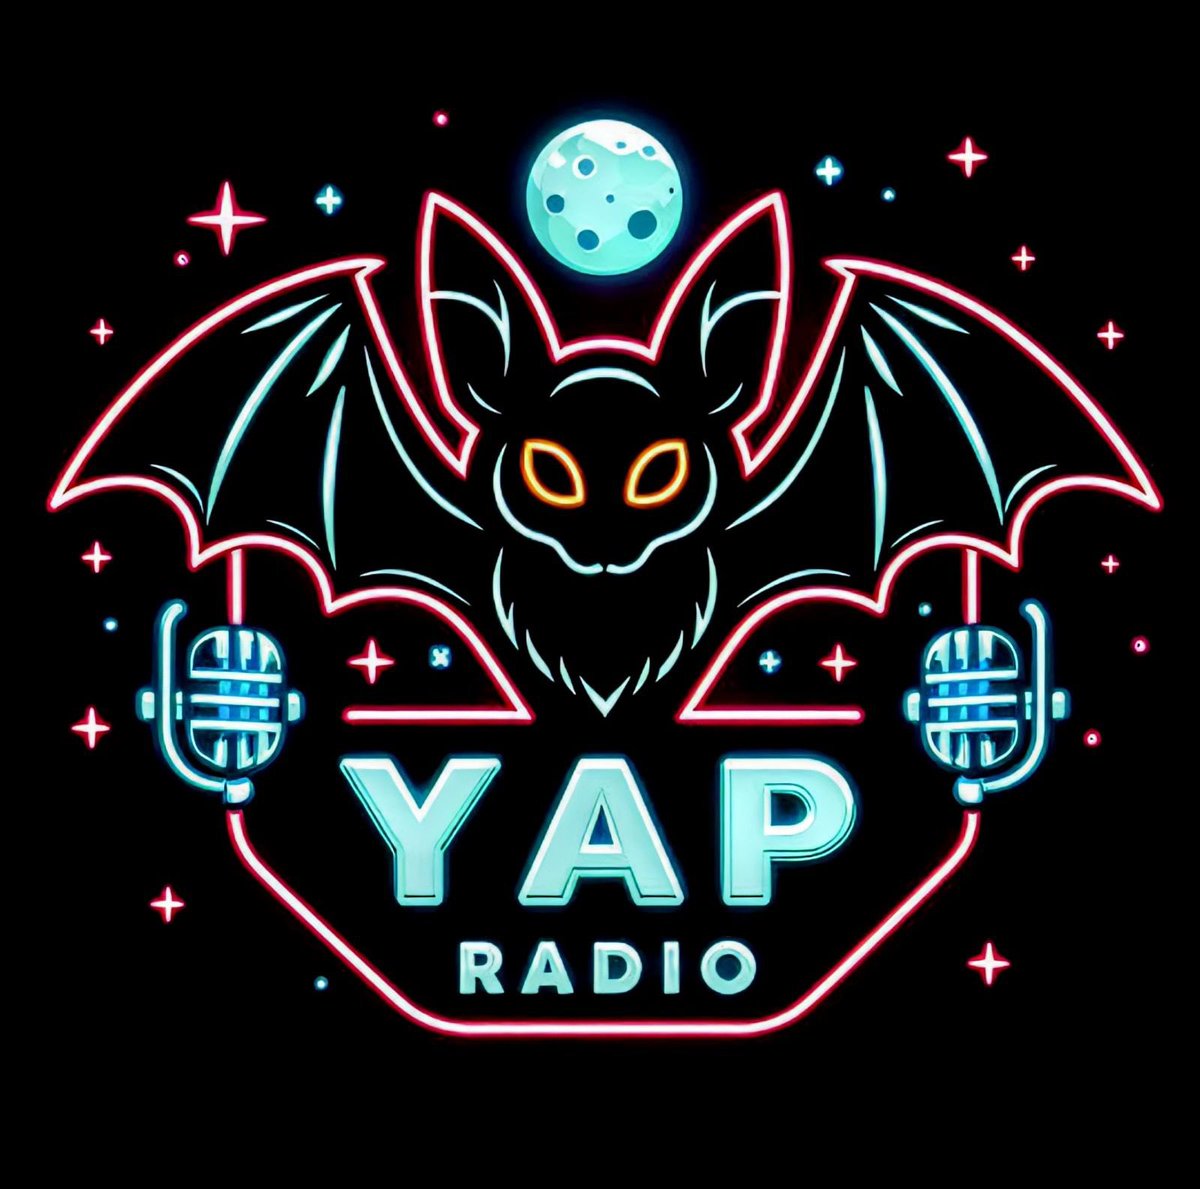 Yap Radio coming soon to X spaces! 🌺🎙️ We’ll be doing what we love to do; talking story with people about food, family, what they are into etc. pretty much any topic while playing some “island” vibes music. We’ll be giving this a try and see how it goes. @TheRealHinano